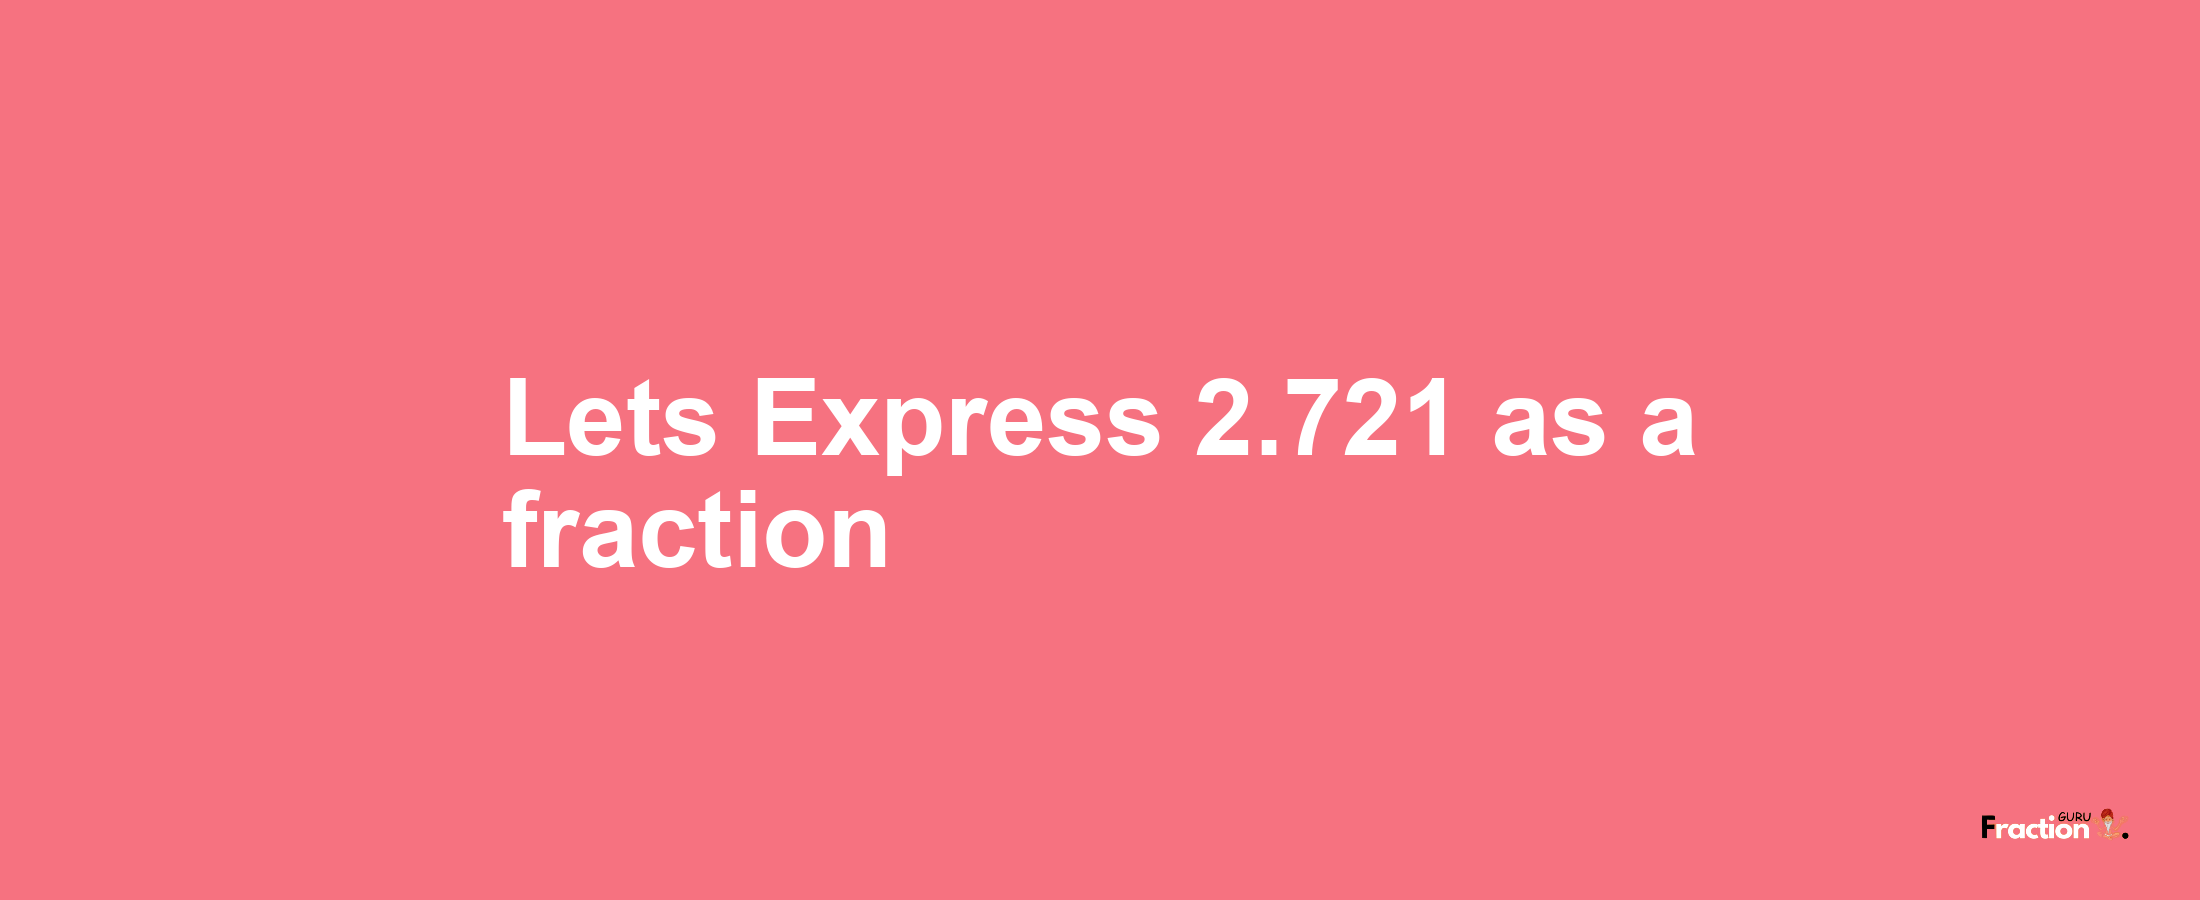 Lets Express 2.721 as afraction